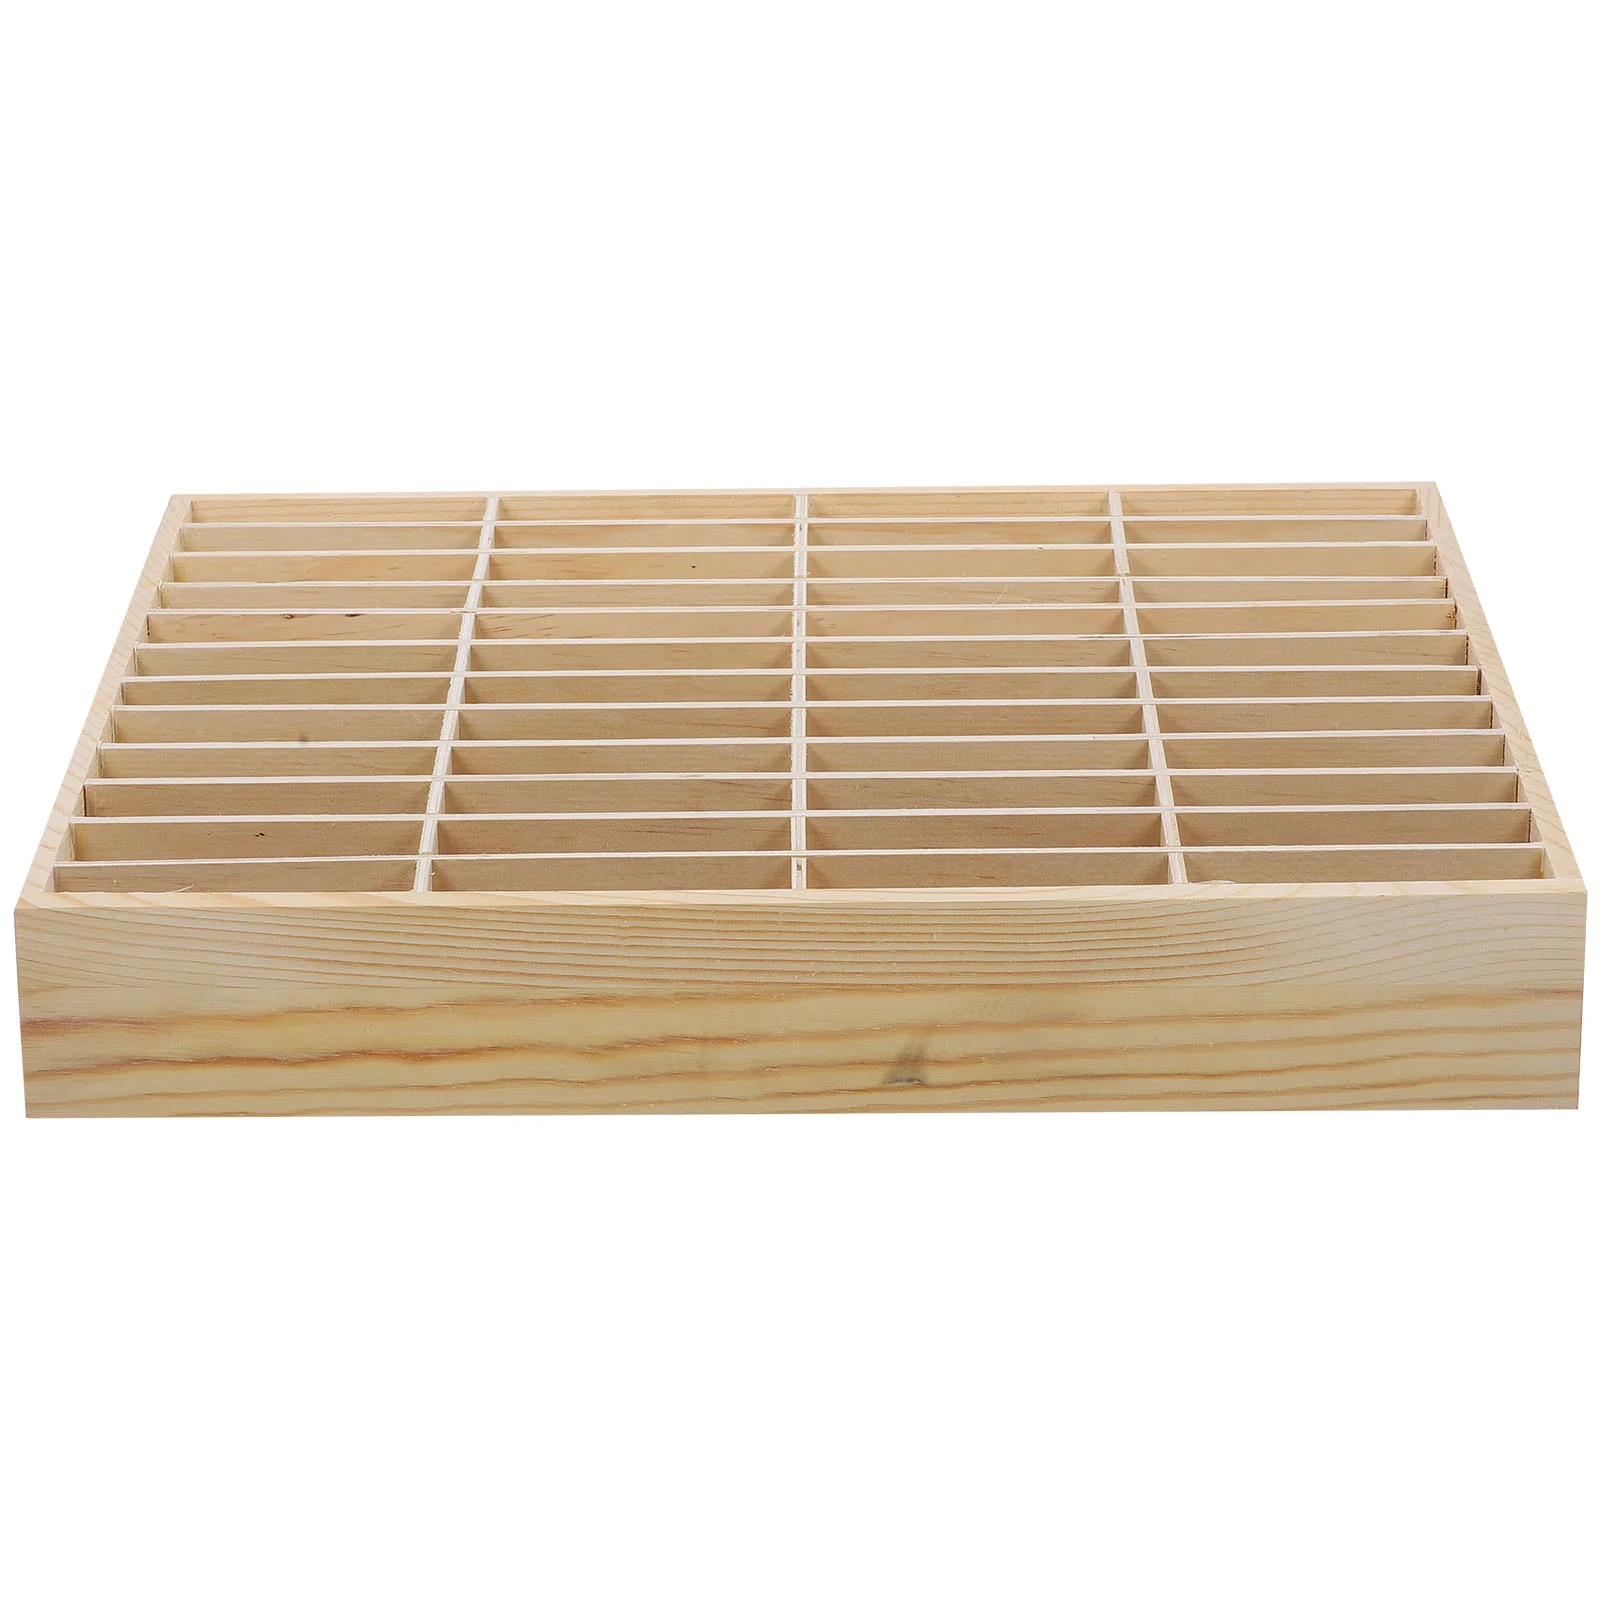 

Mobile Phone Storage Box Office Calculators Holder Meeting Room Organizer Dog Table Cell Section Case Wooden Desktop Rack